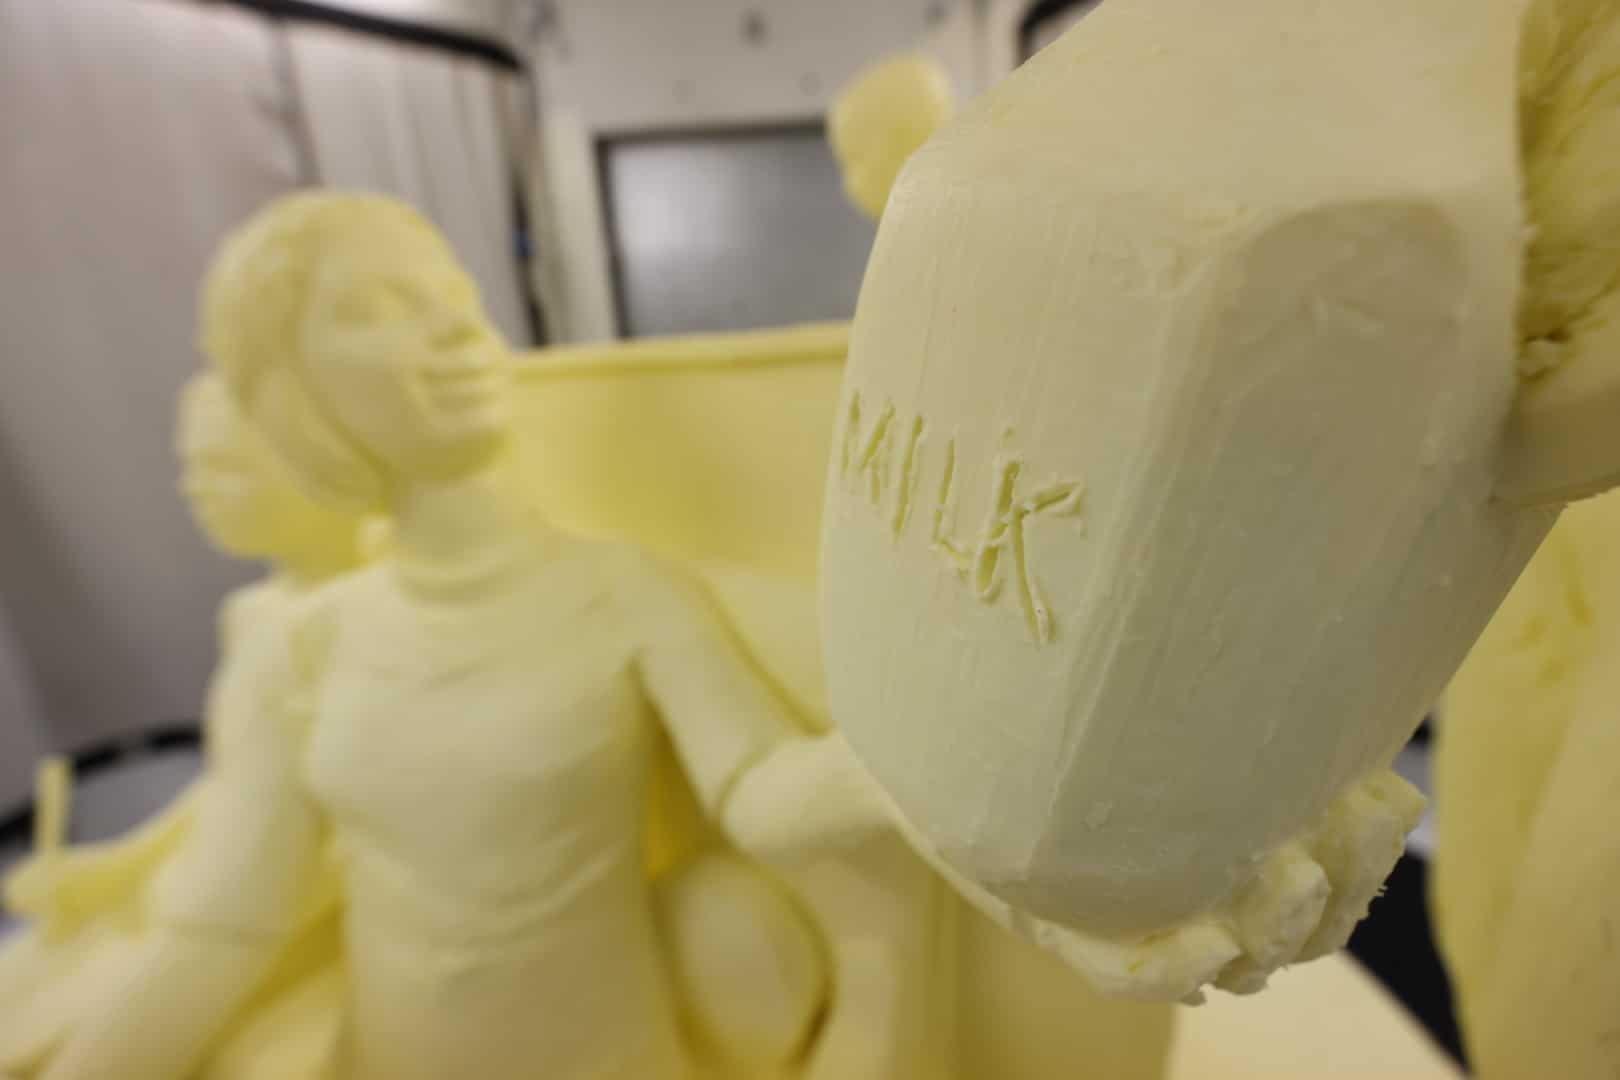 What Really Happens to the Butter Sculpture?